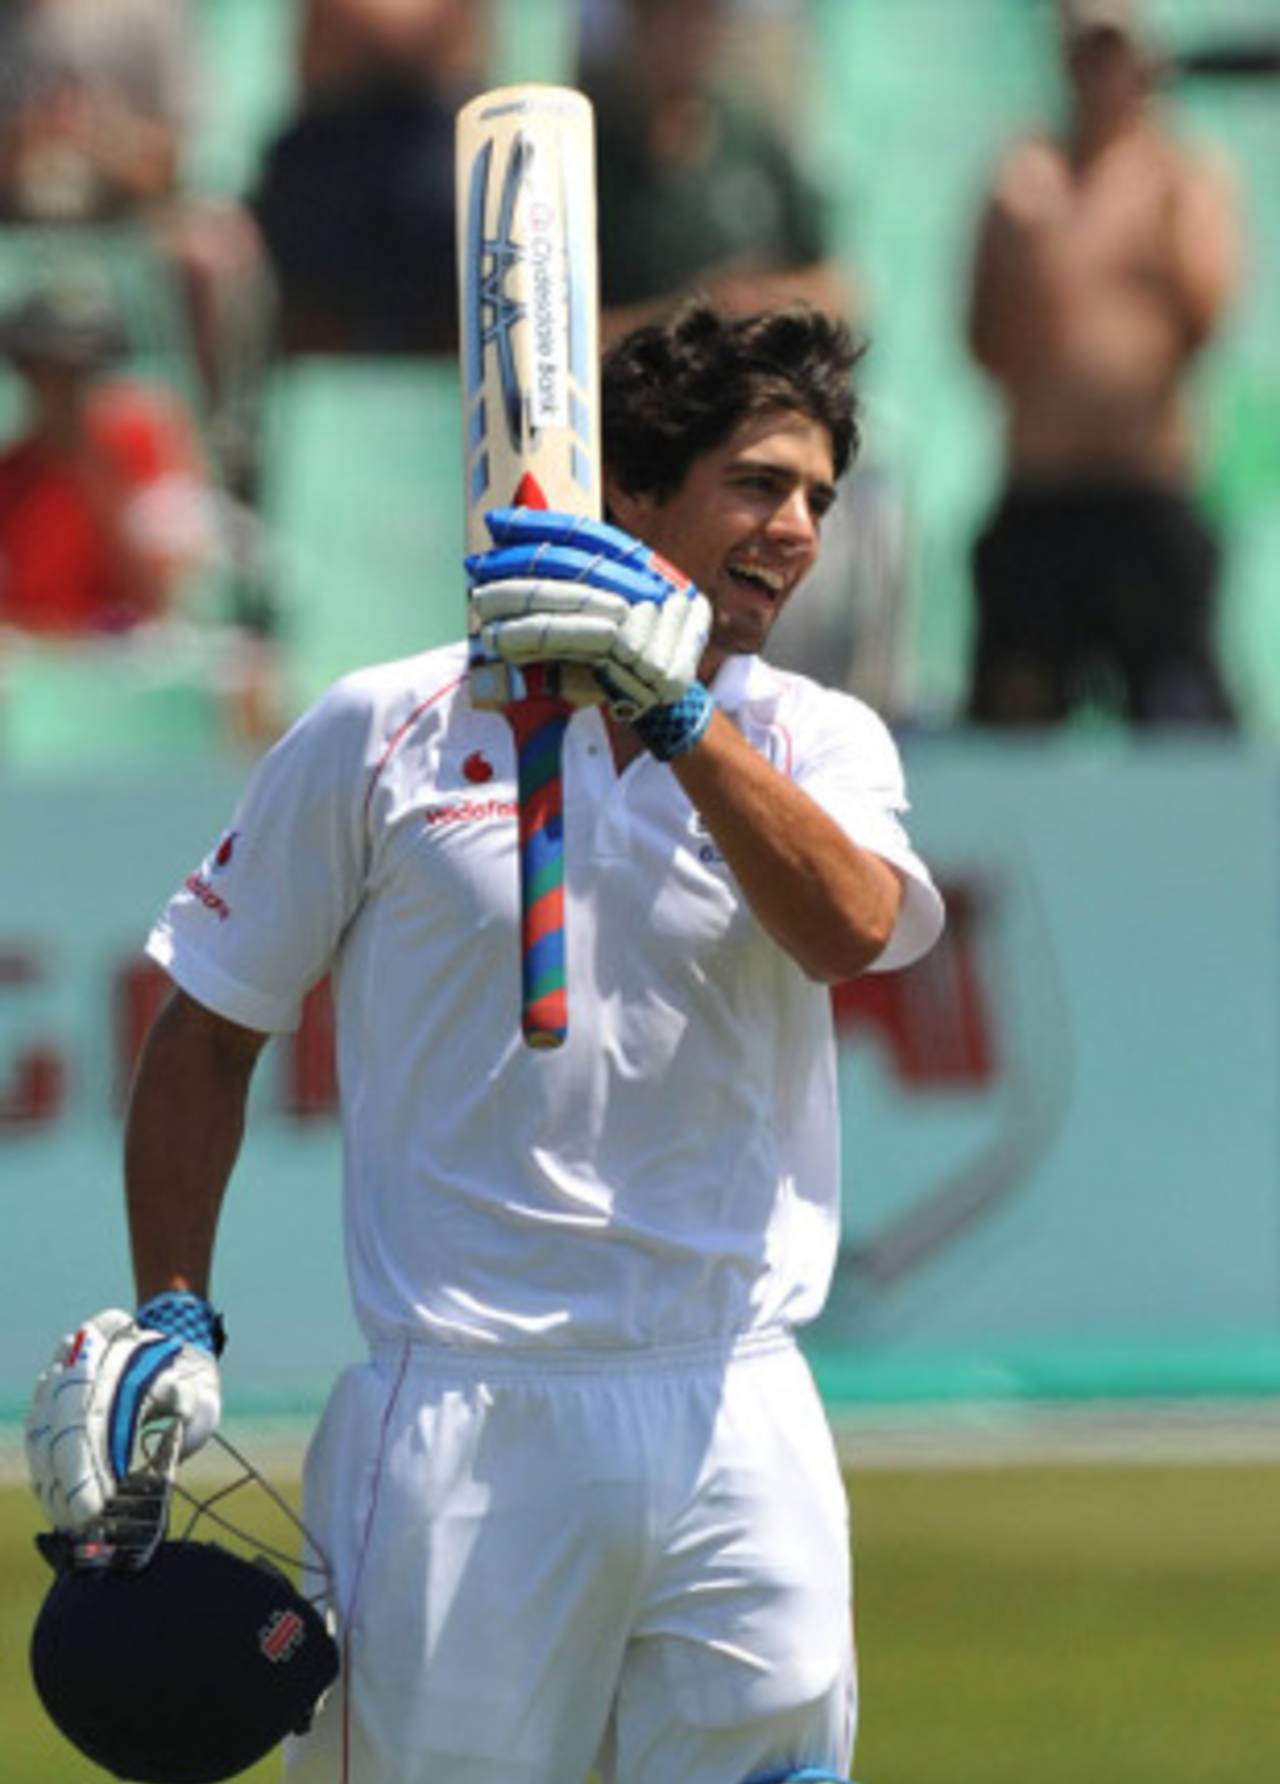 Alastair Cook was delighted to complete his 10th Test century, South Africa v England, 2nd Test, Durban, December 28, 2009 